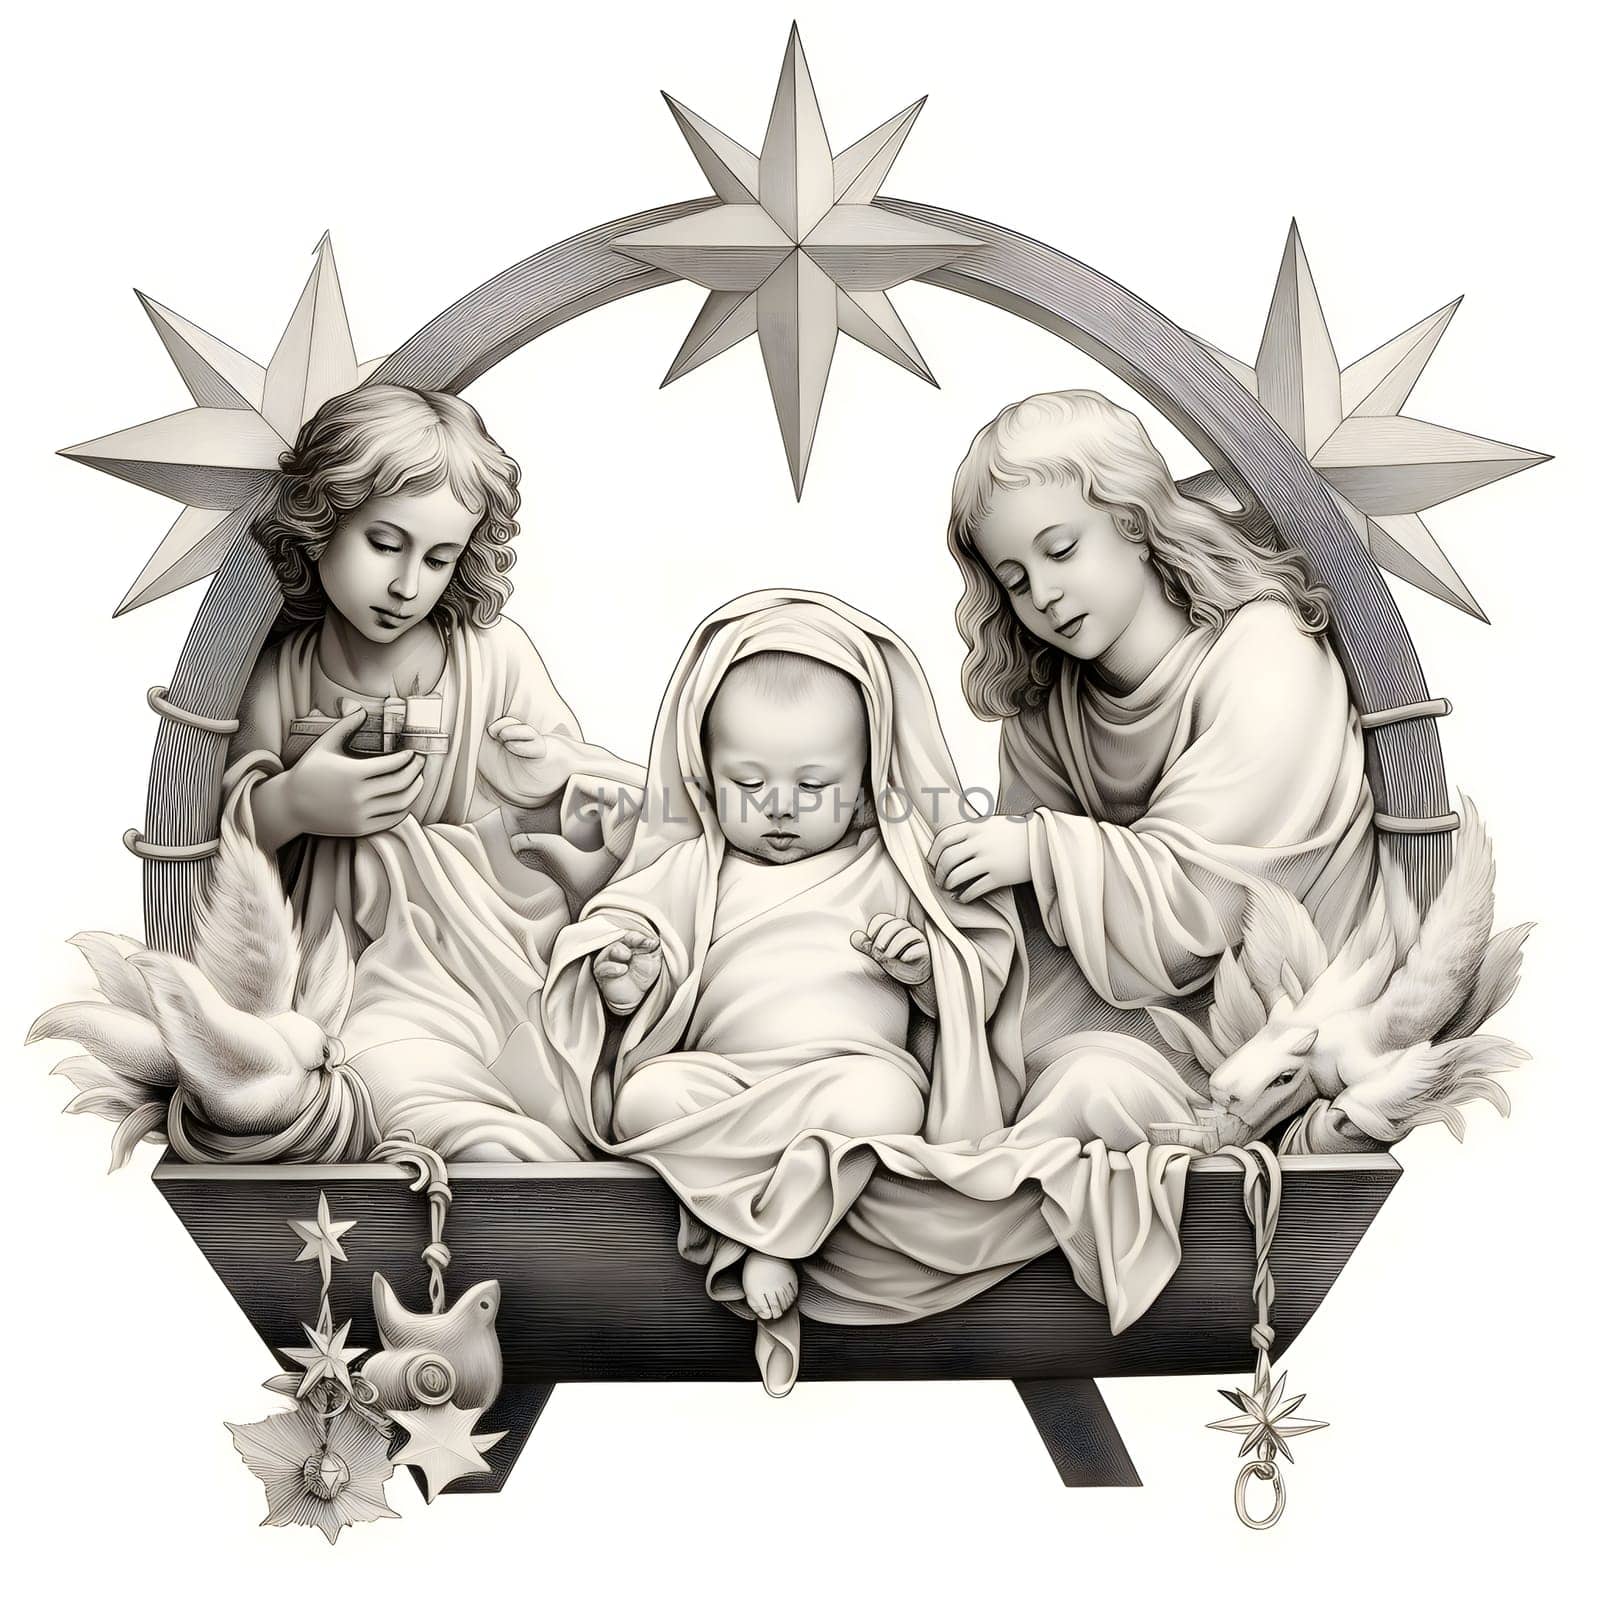 Black and White coloring sheet of a manger, a born baby and two angels. The Christmas star as a symbol of the birth of the savior. A Time of Joy and Celebration.